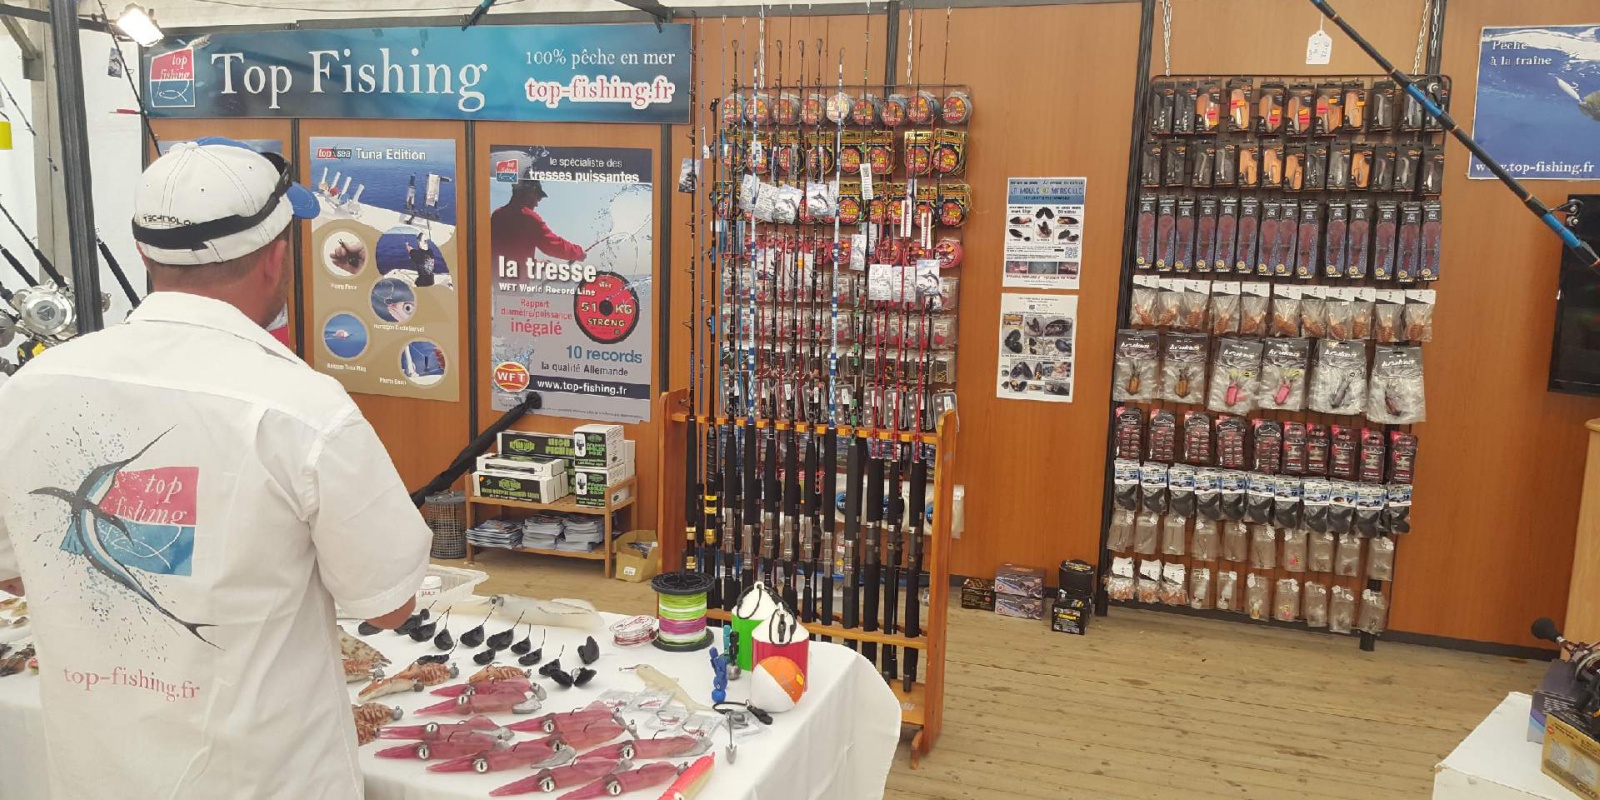 Le stand Top Fishing, plan large